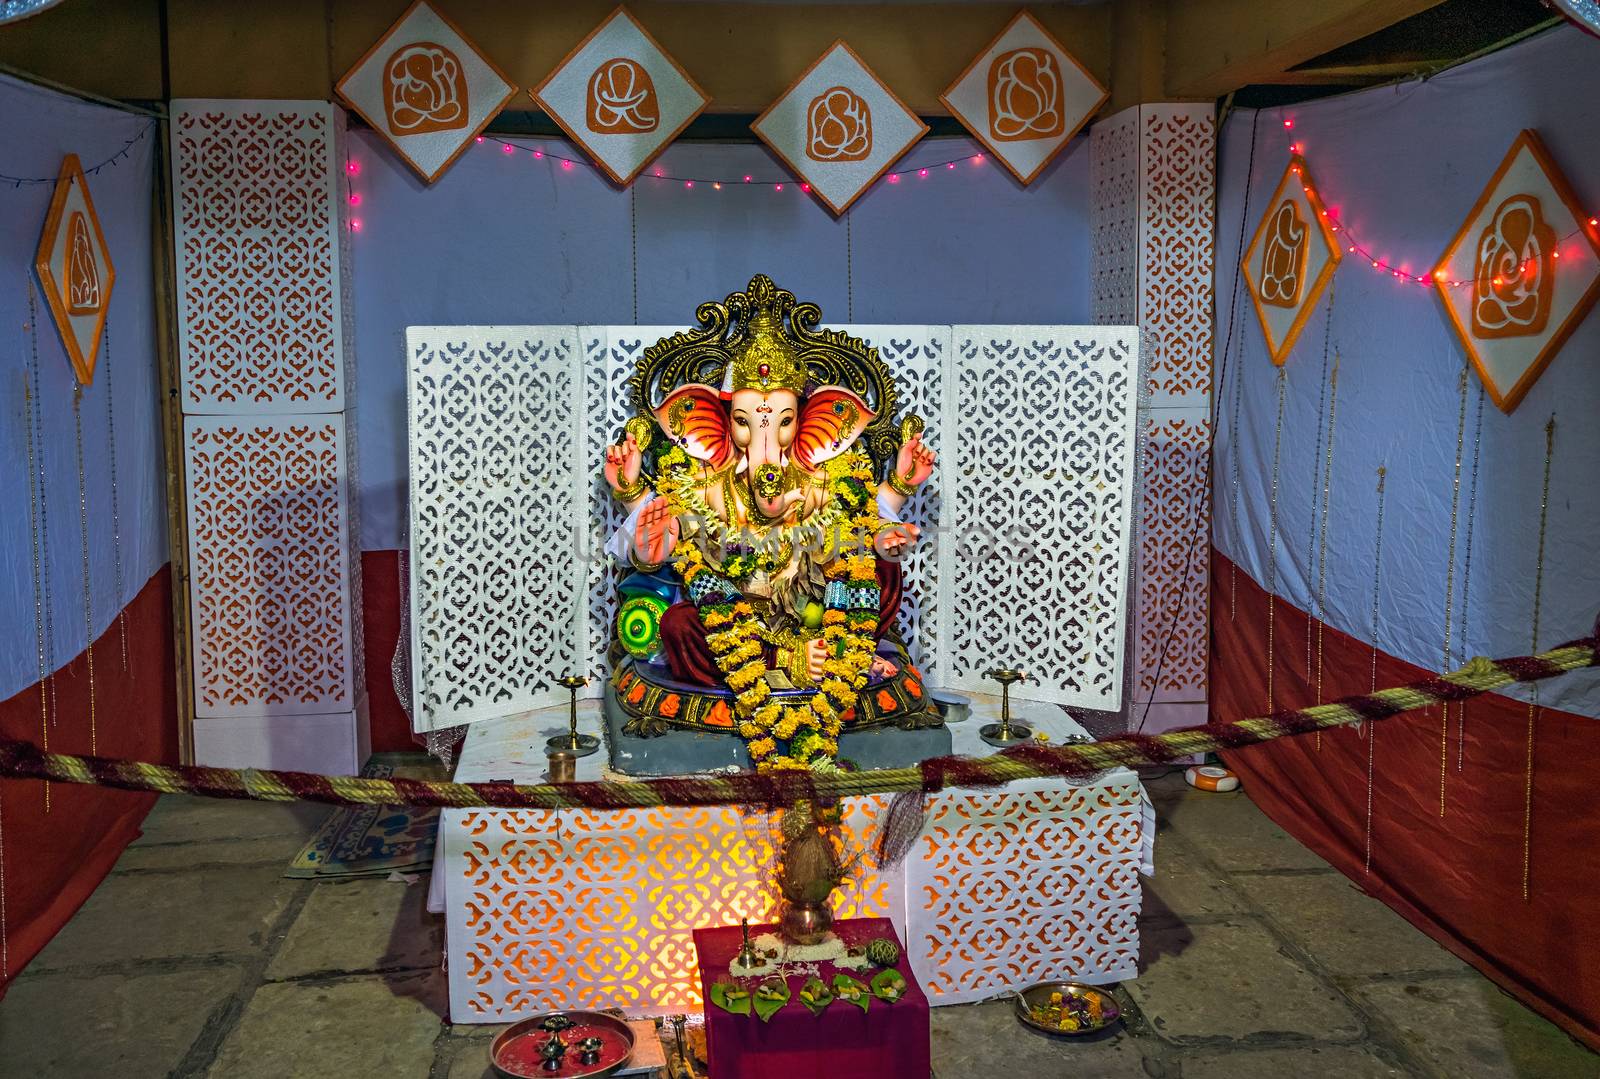 Garlanded deity idol of Lord Ganesha installed with background decorations for festival. by lalam